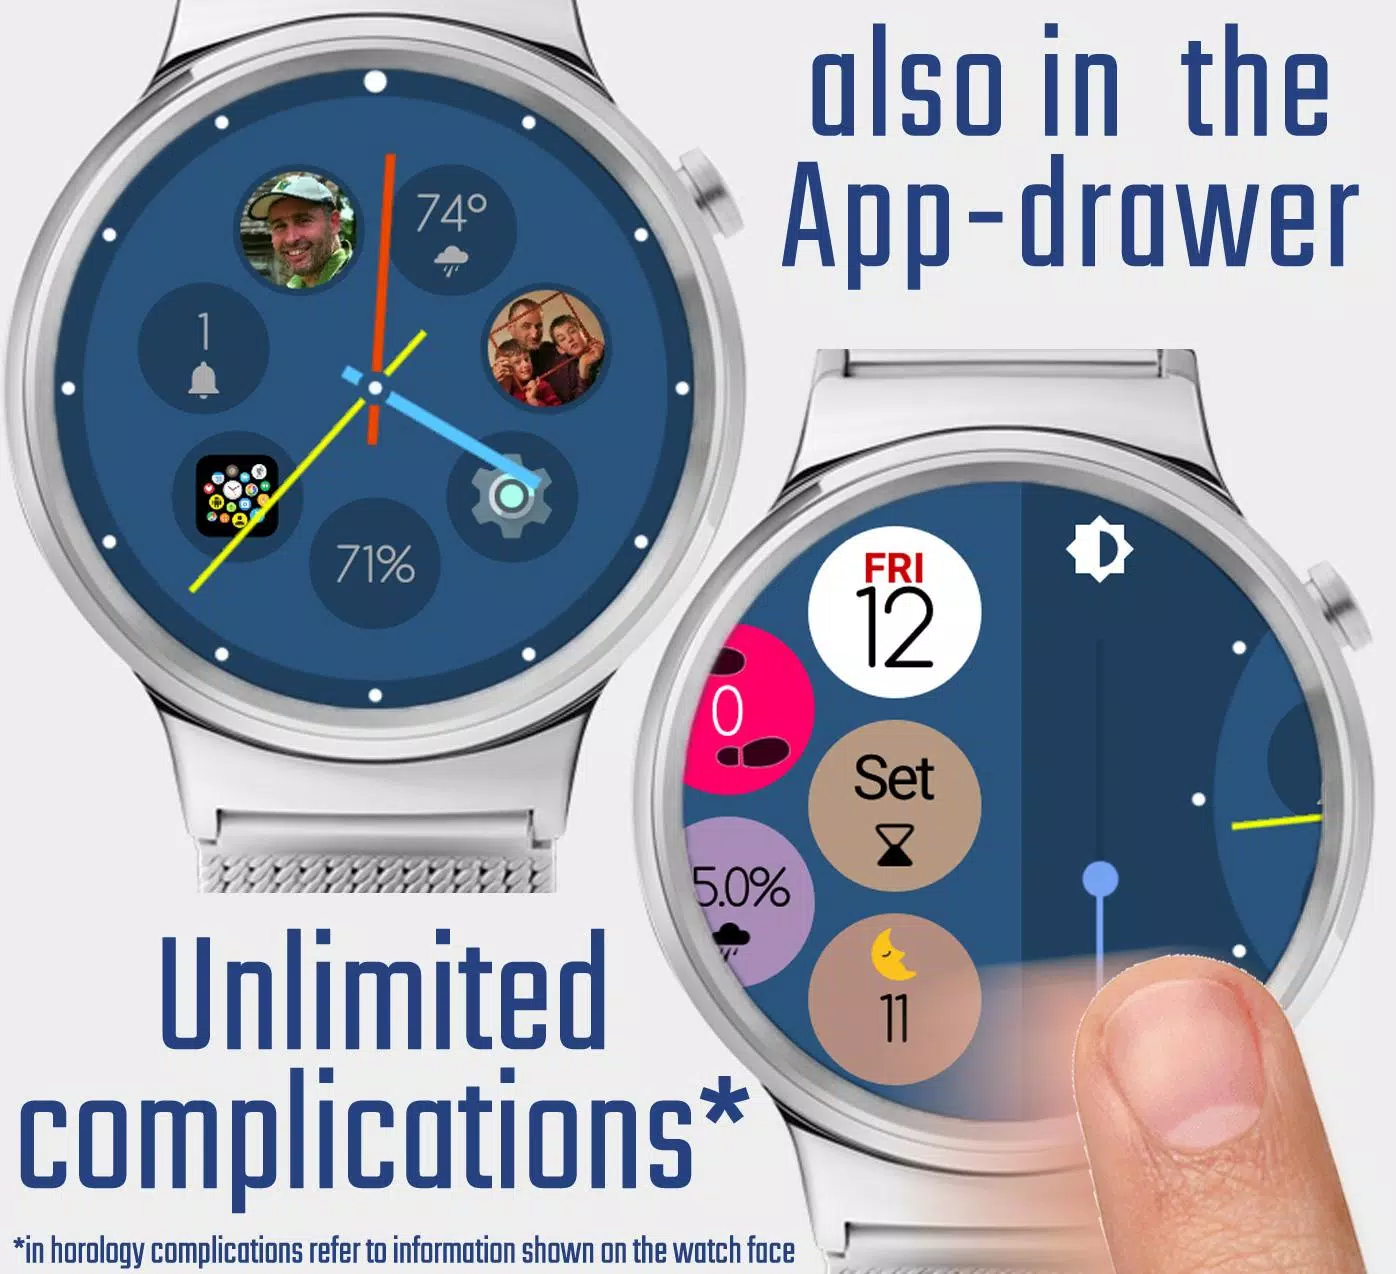 Bubble Cloud Wear OS Launcher APK for Android Download